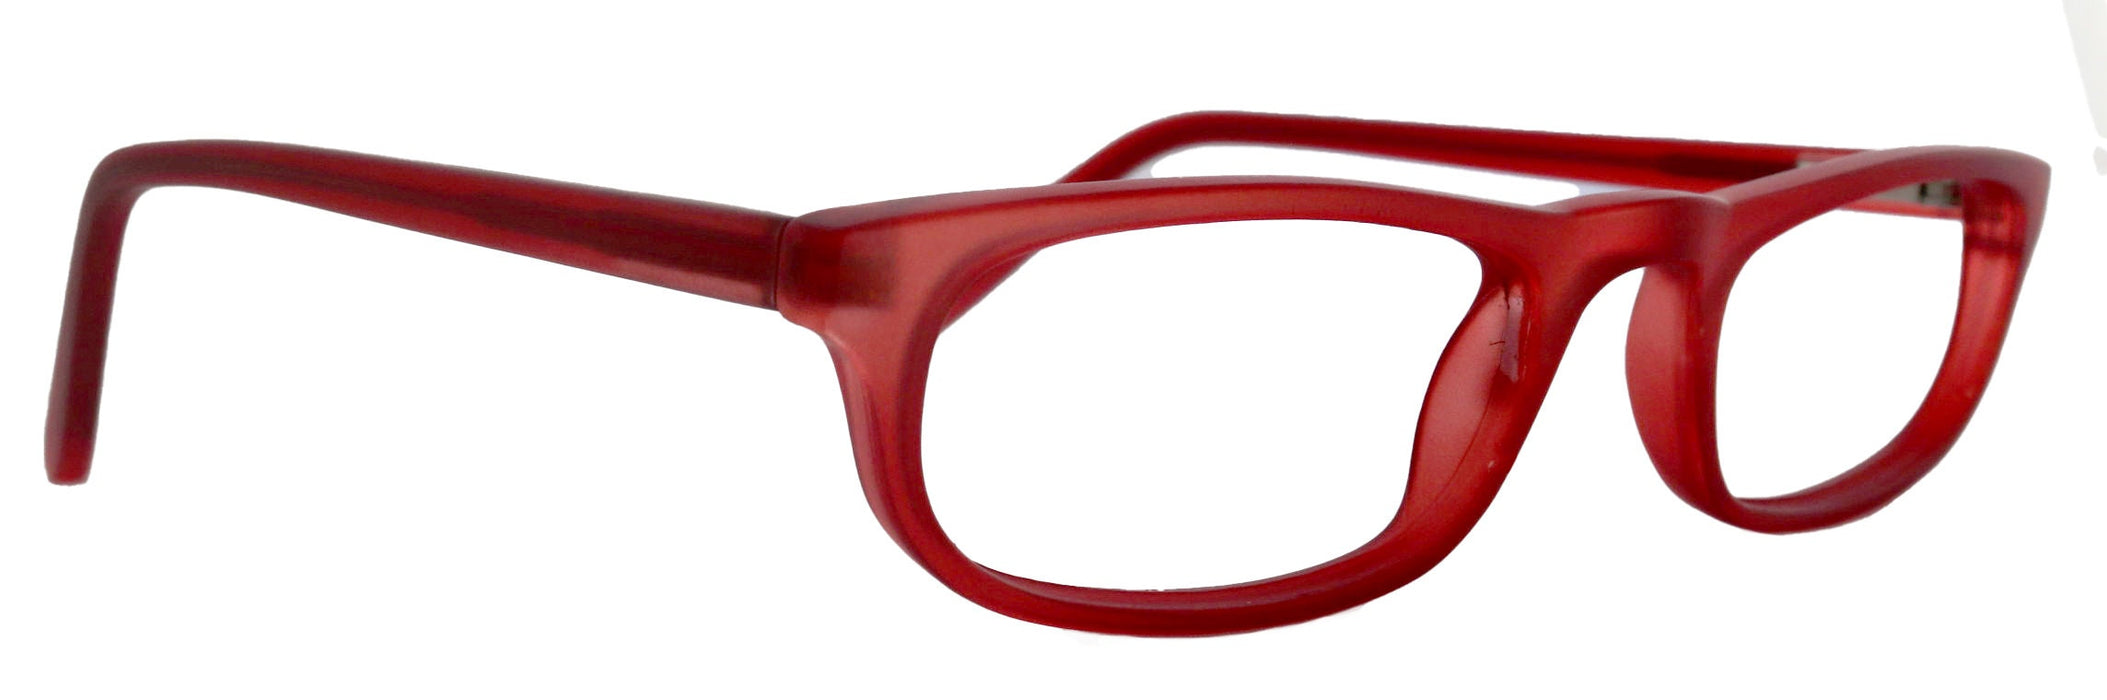 Morgan Premium Reading Glasses High-End Magnifying Readers, Transparent Red, Small Rectangular Frame, Inspired by NY Fifth Avenue Lower nose